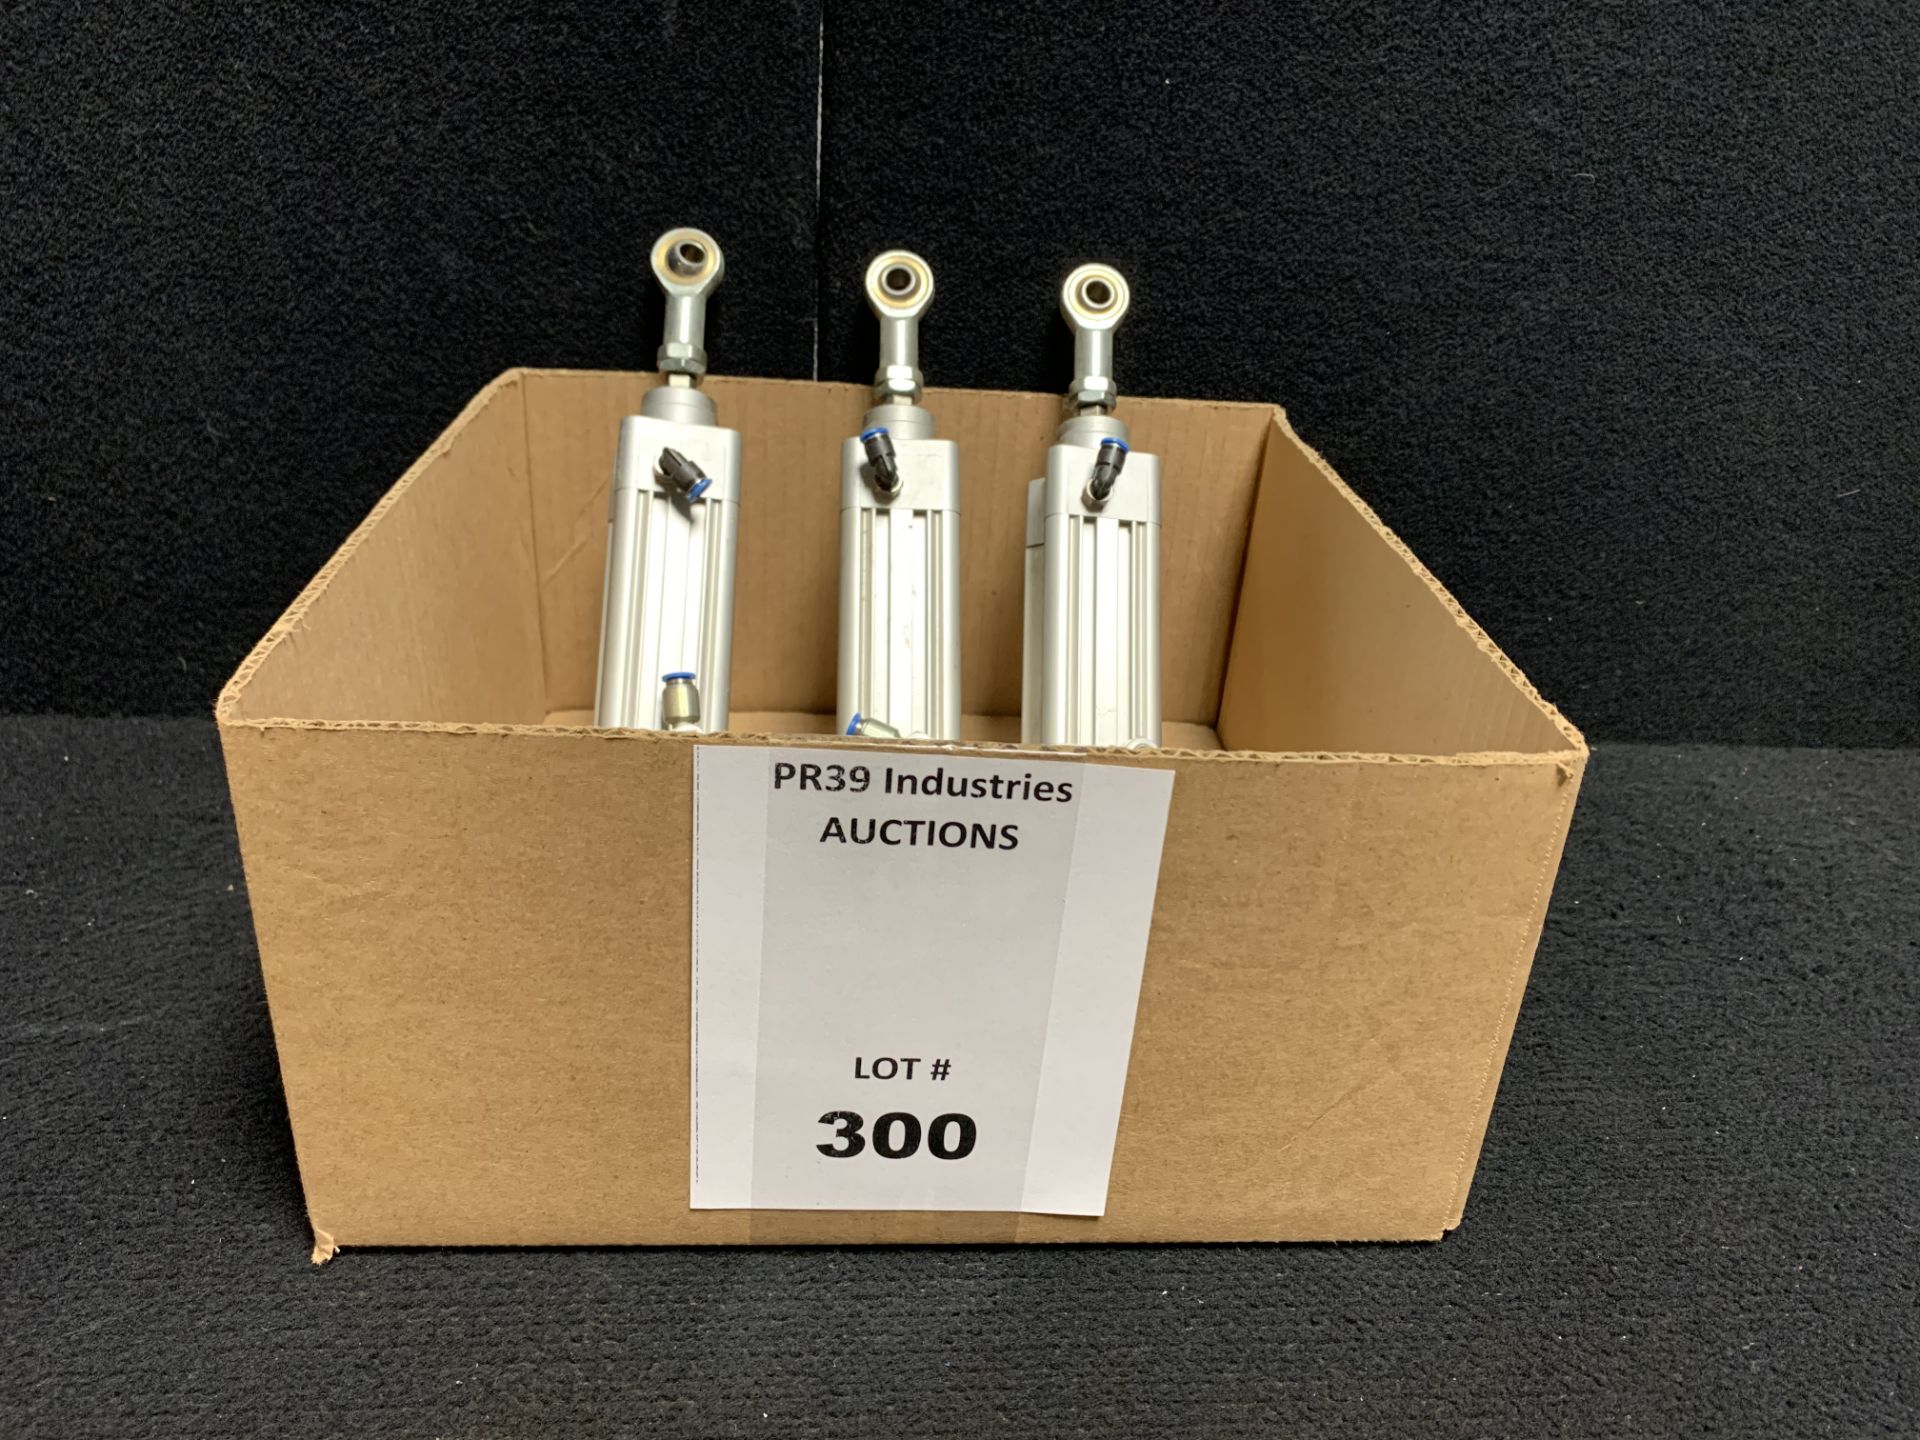 NEW OUT OF BOX - FESTO ELECTRIC DSBC-63-50-PA-N3 PNEUMATIC CYLINDER